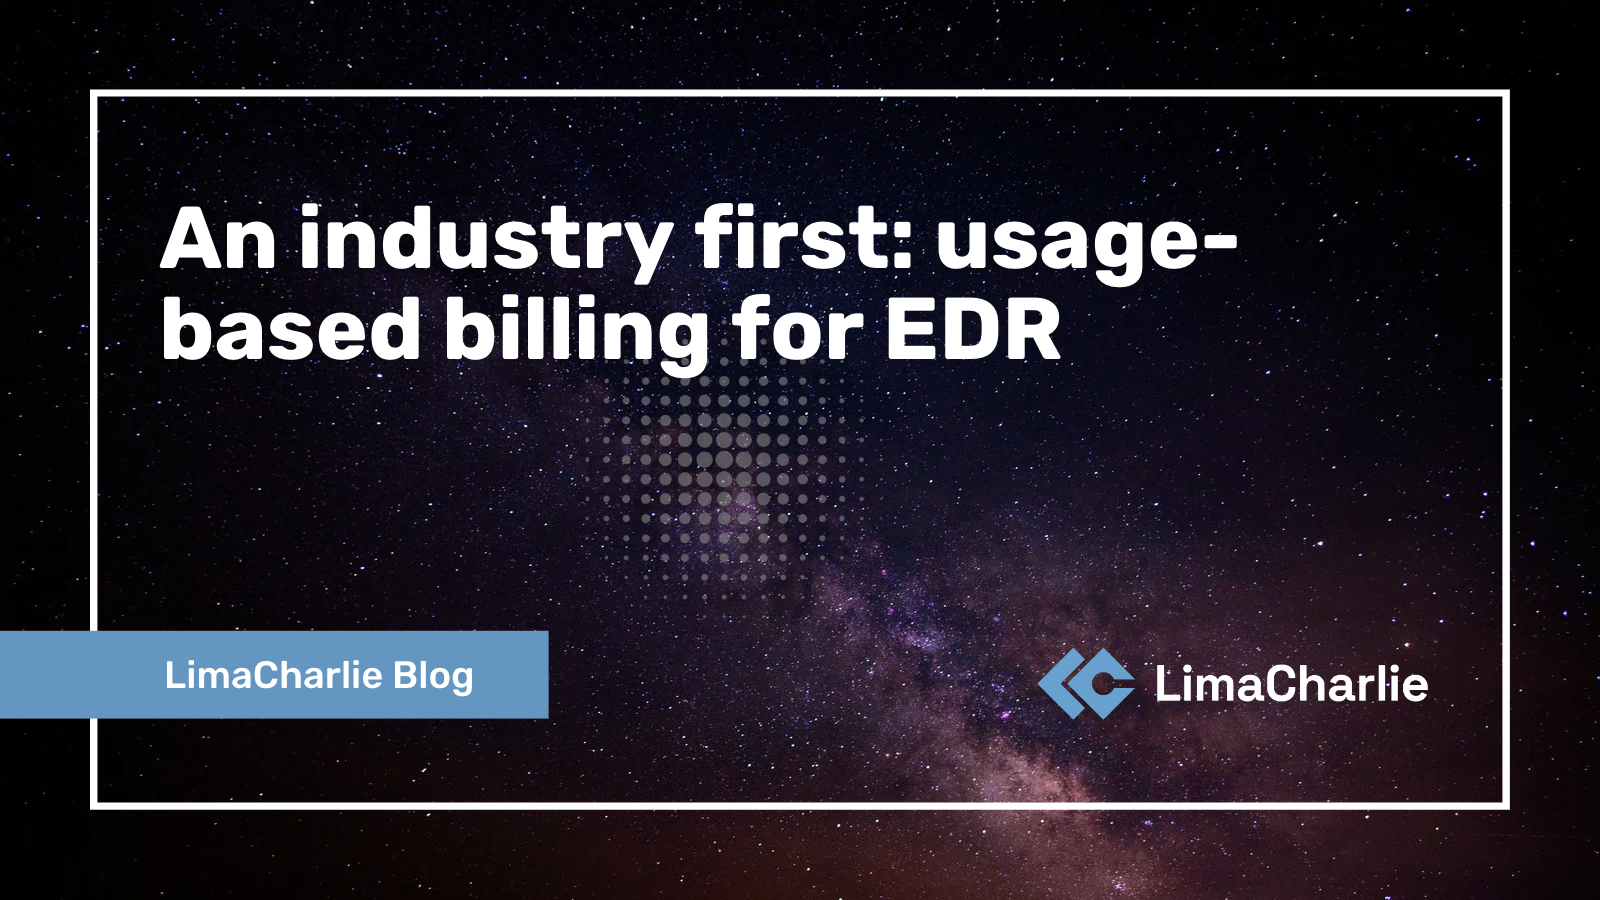 An industry first: Usage-based billing for EDR